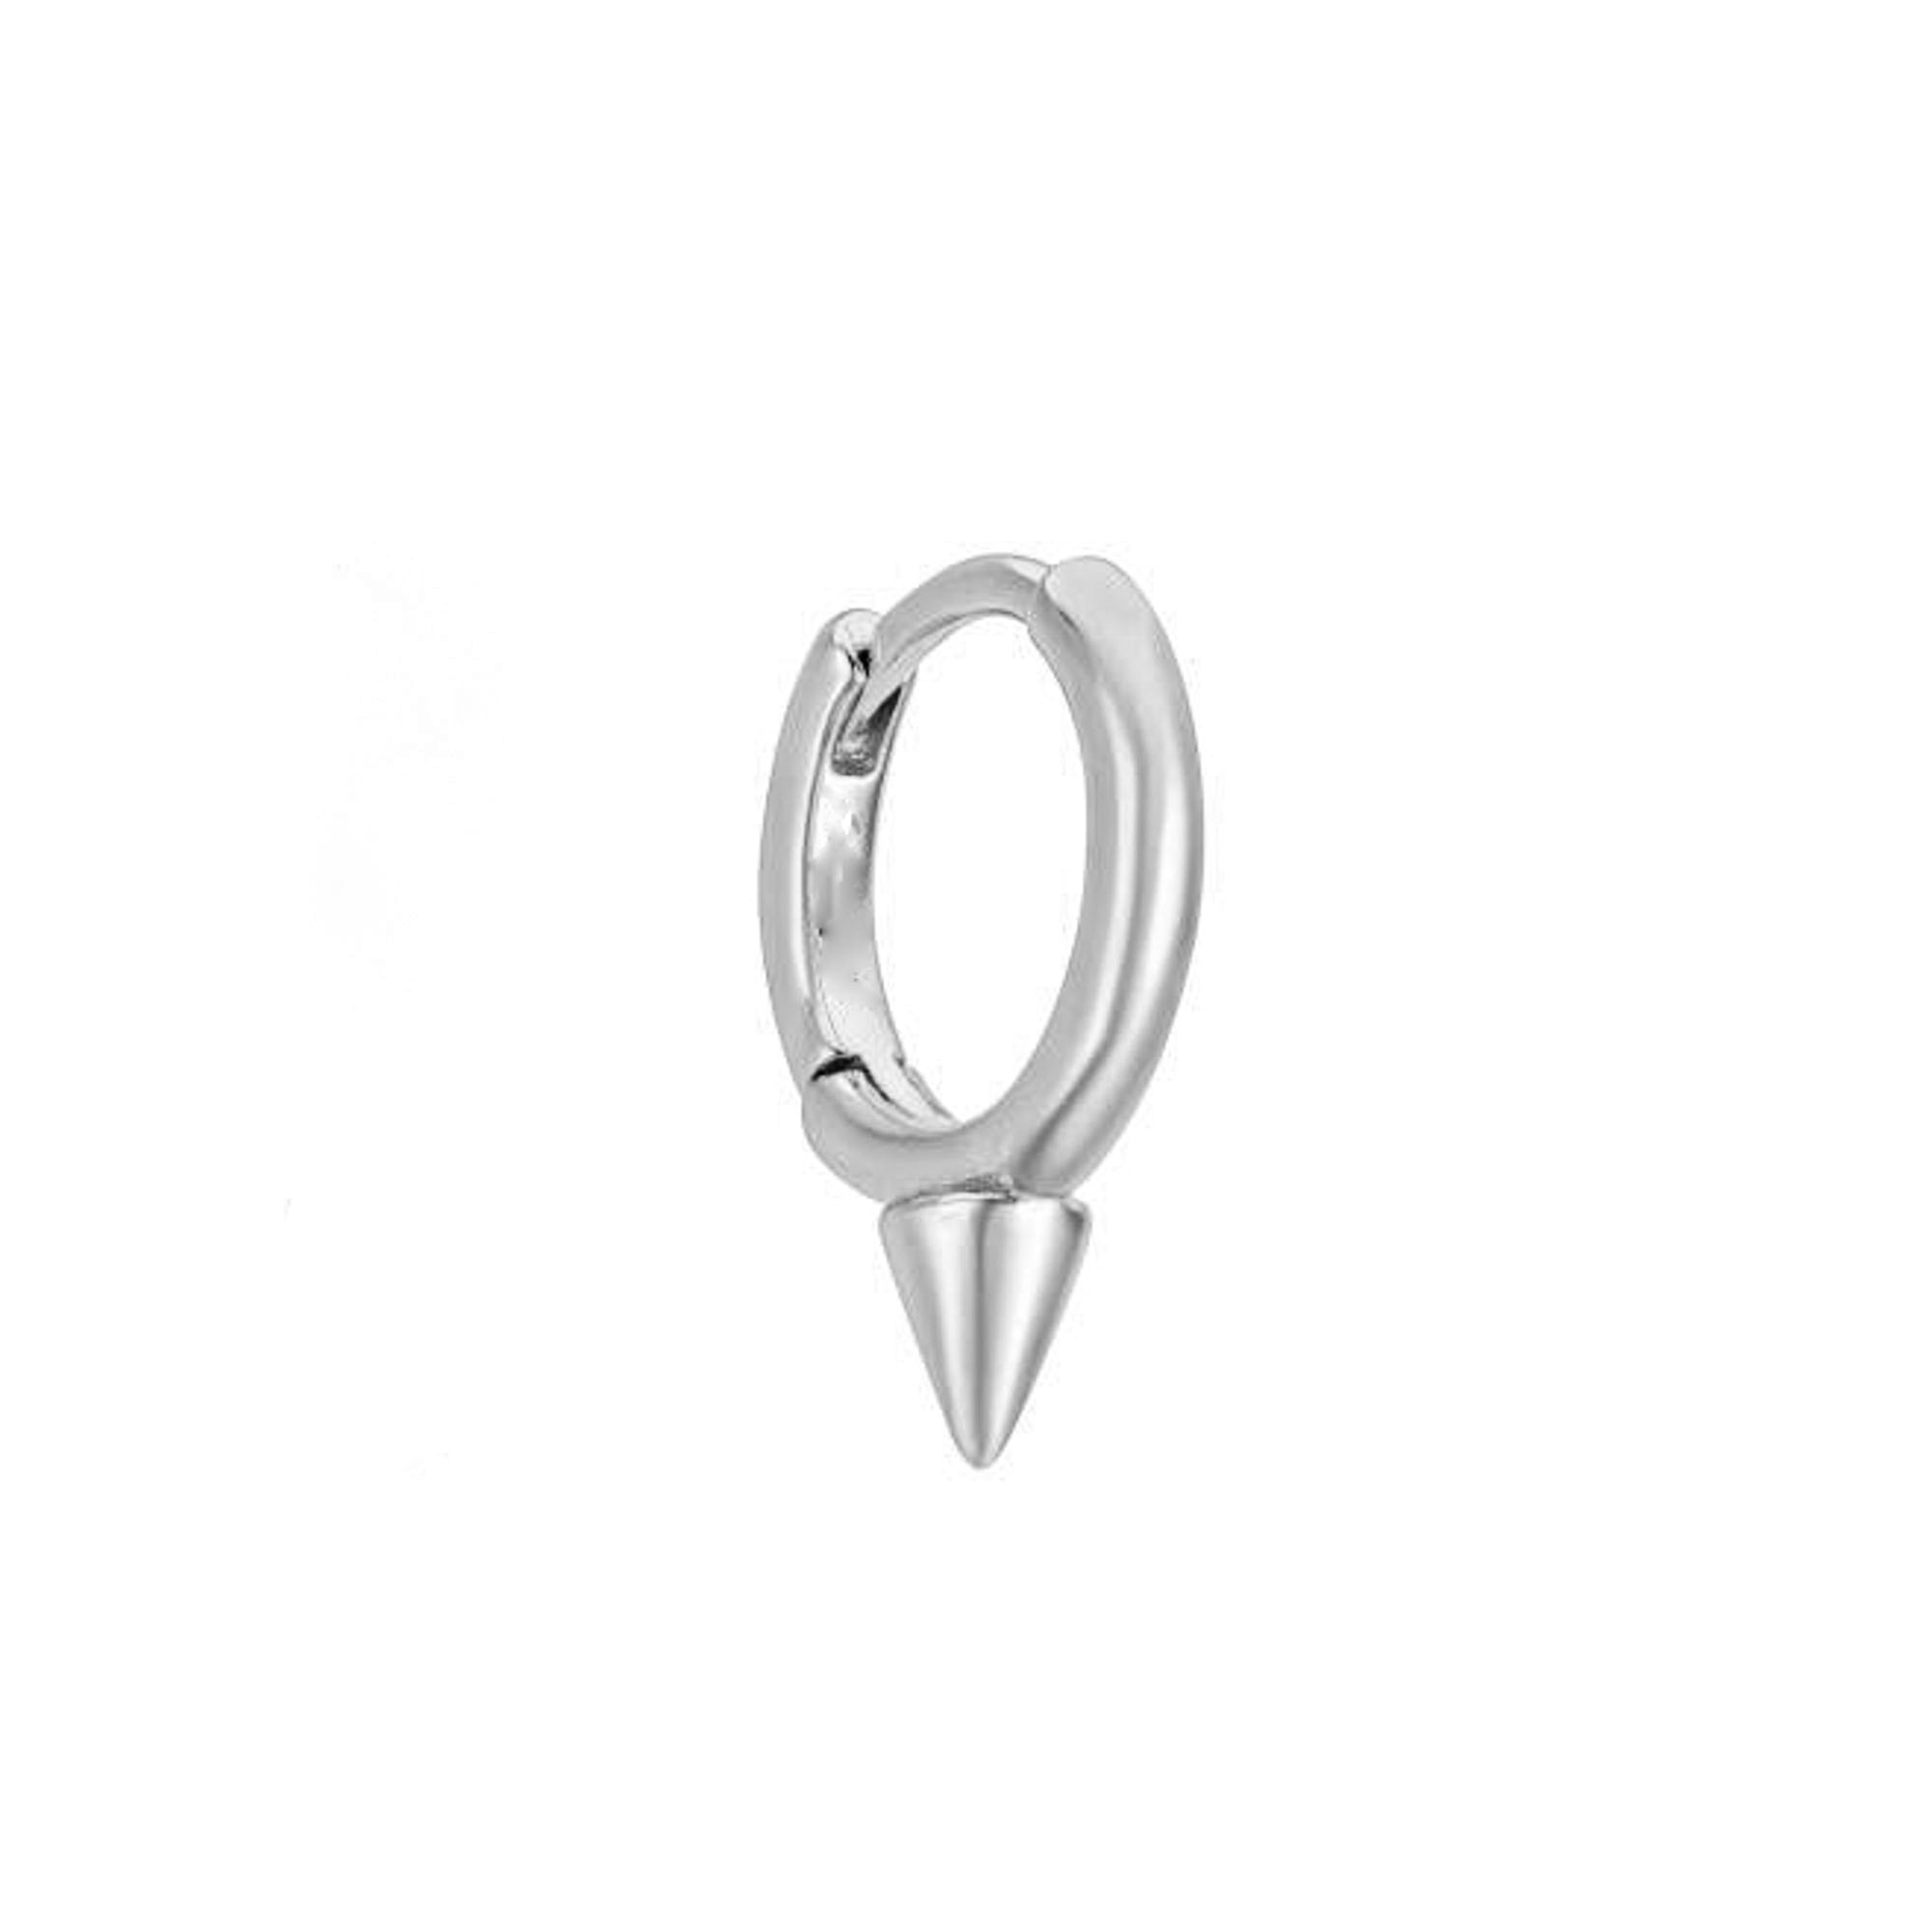 Conique white gold spike huggie hoop earring - Helix & Conch